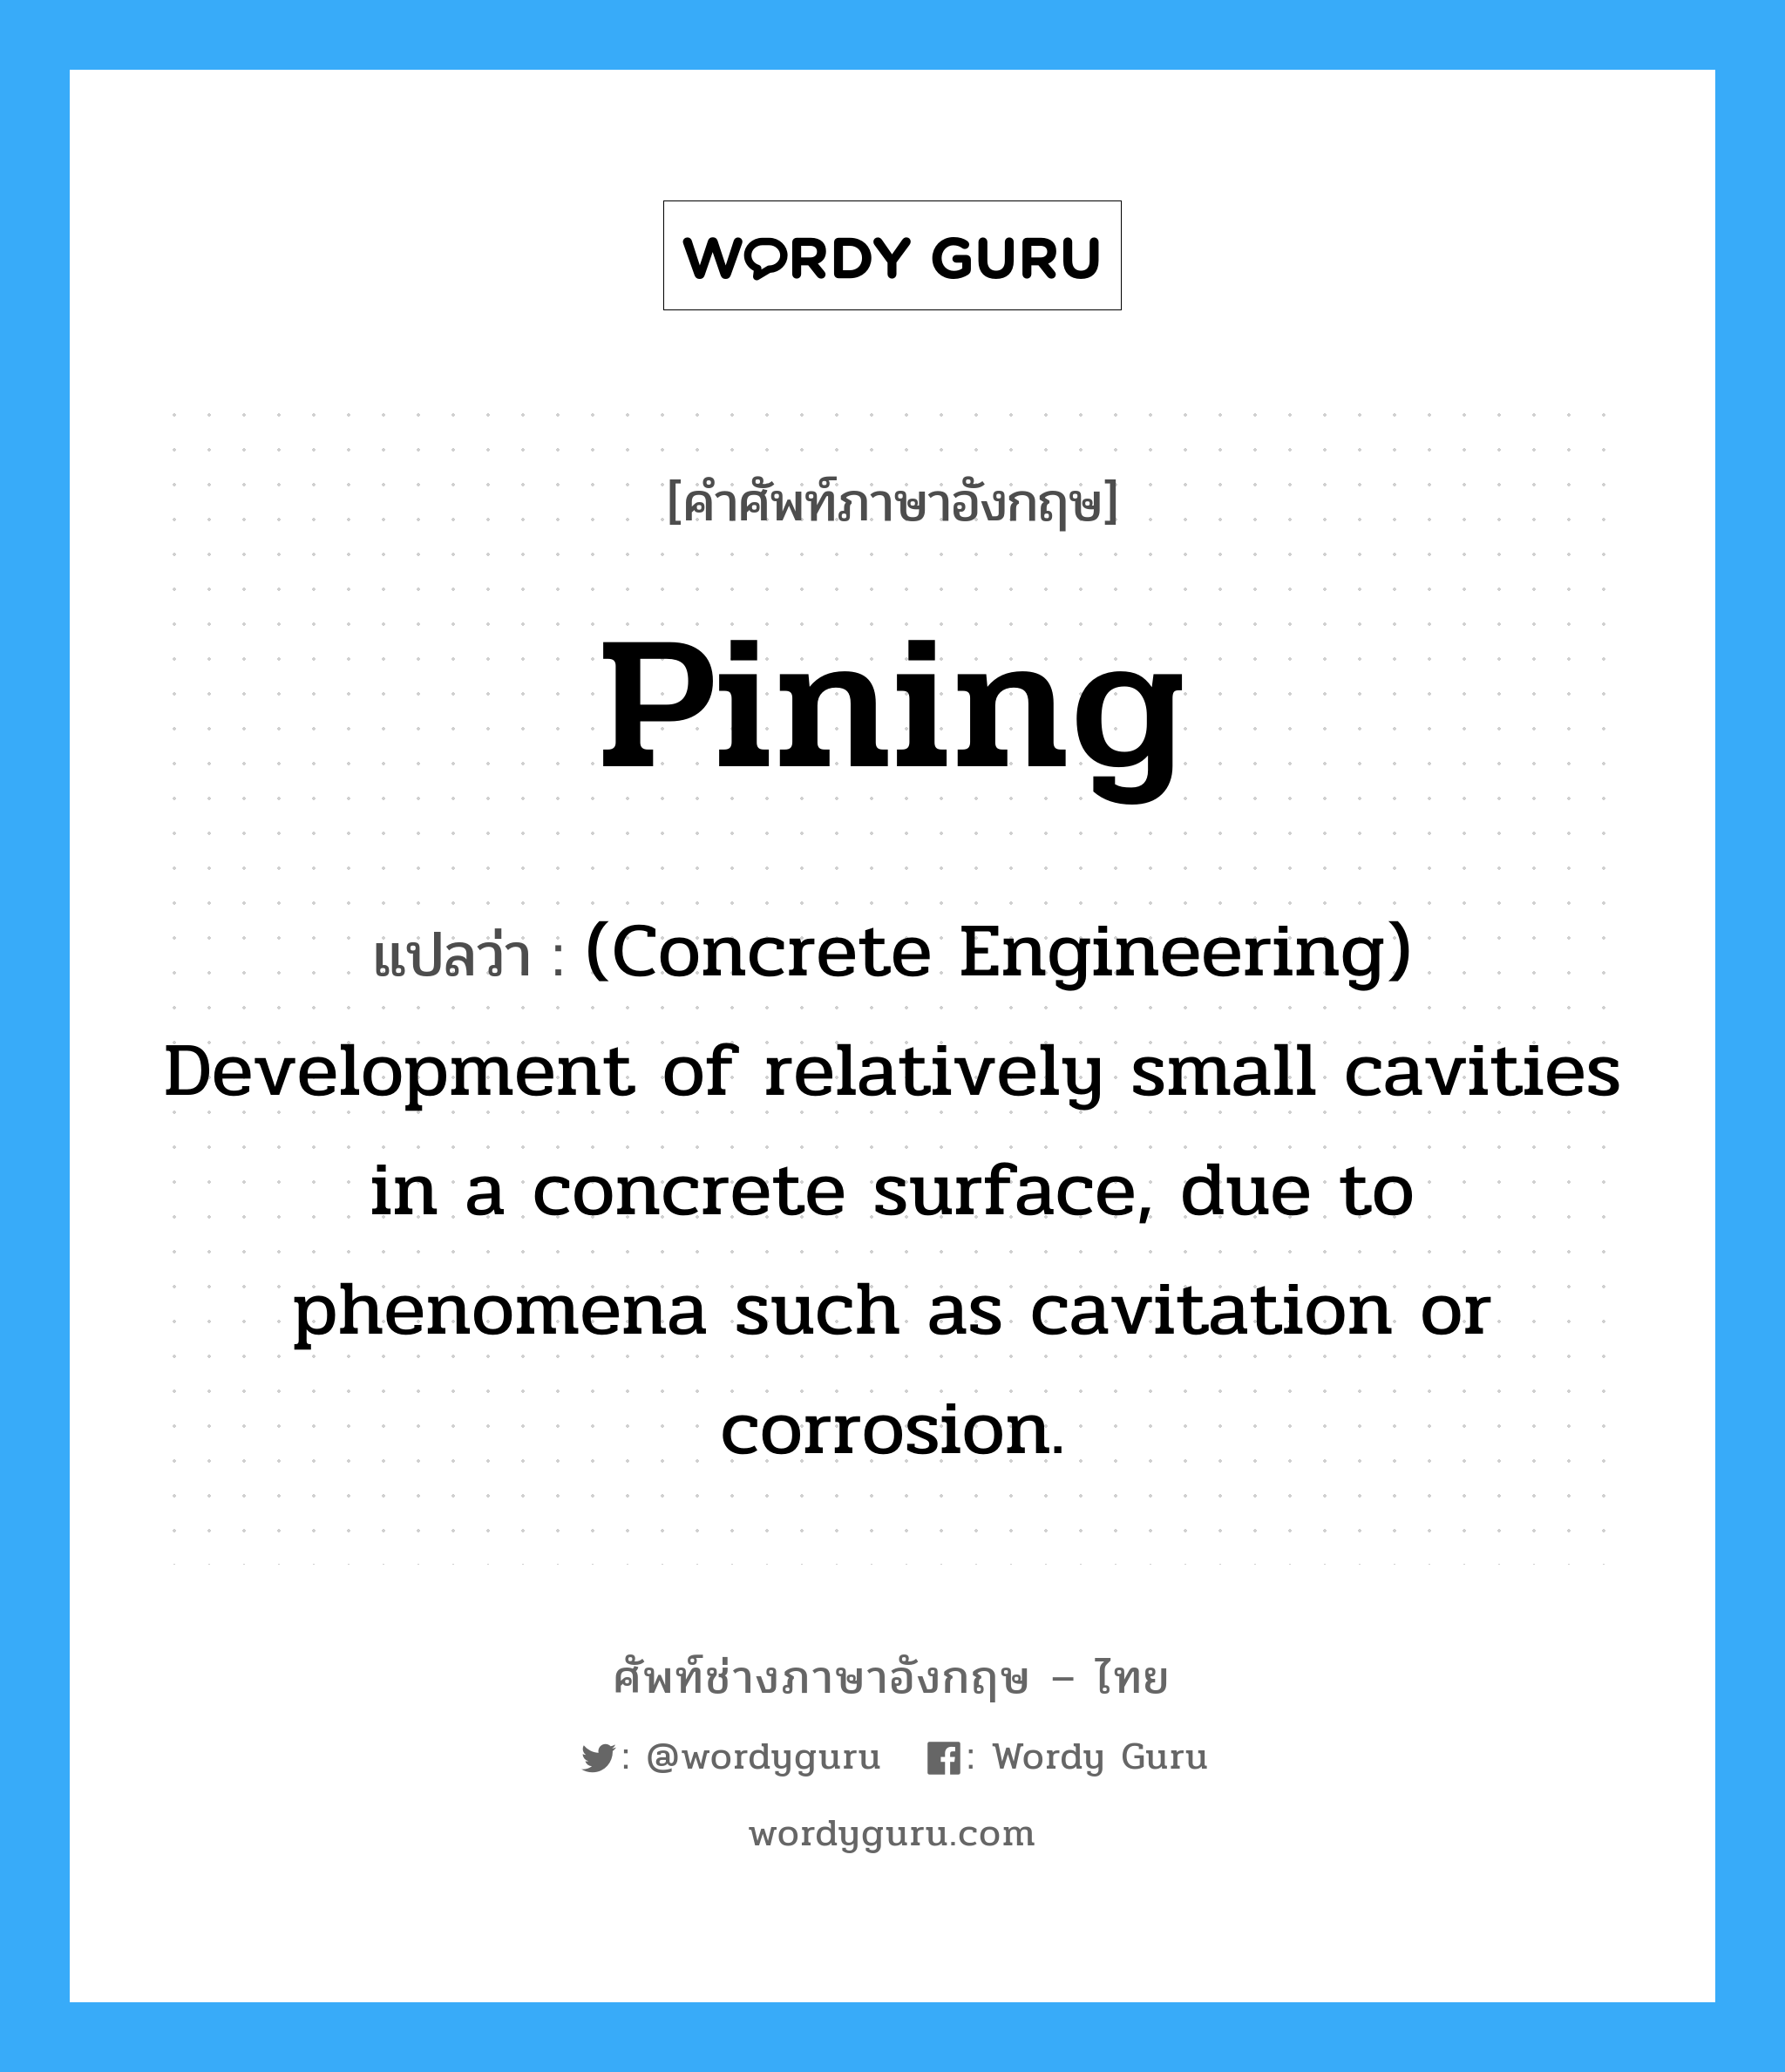 Pining แปลว่า?, คำศัพท์ช่างภาษาอังกฤษ - ไทย Pining คำศัพท์ภาษาอังกฤษ Pining แปลว่า (Concrete Engineering) Development of relatively small cavities in a concrete surface, due to phenomena such as cavitation or corrosion.